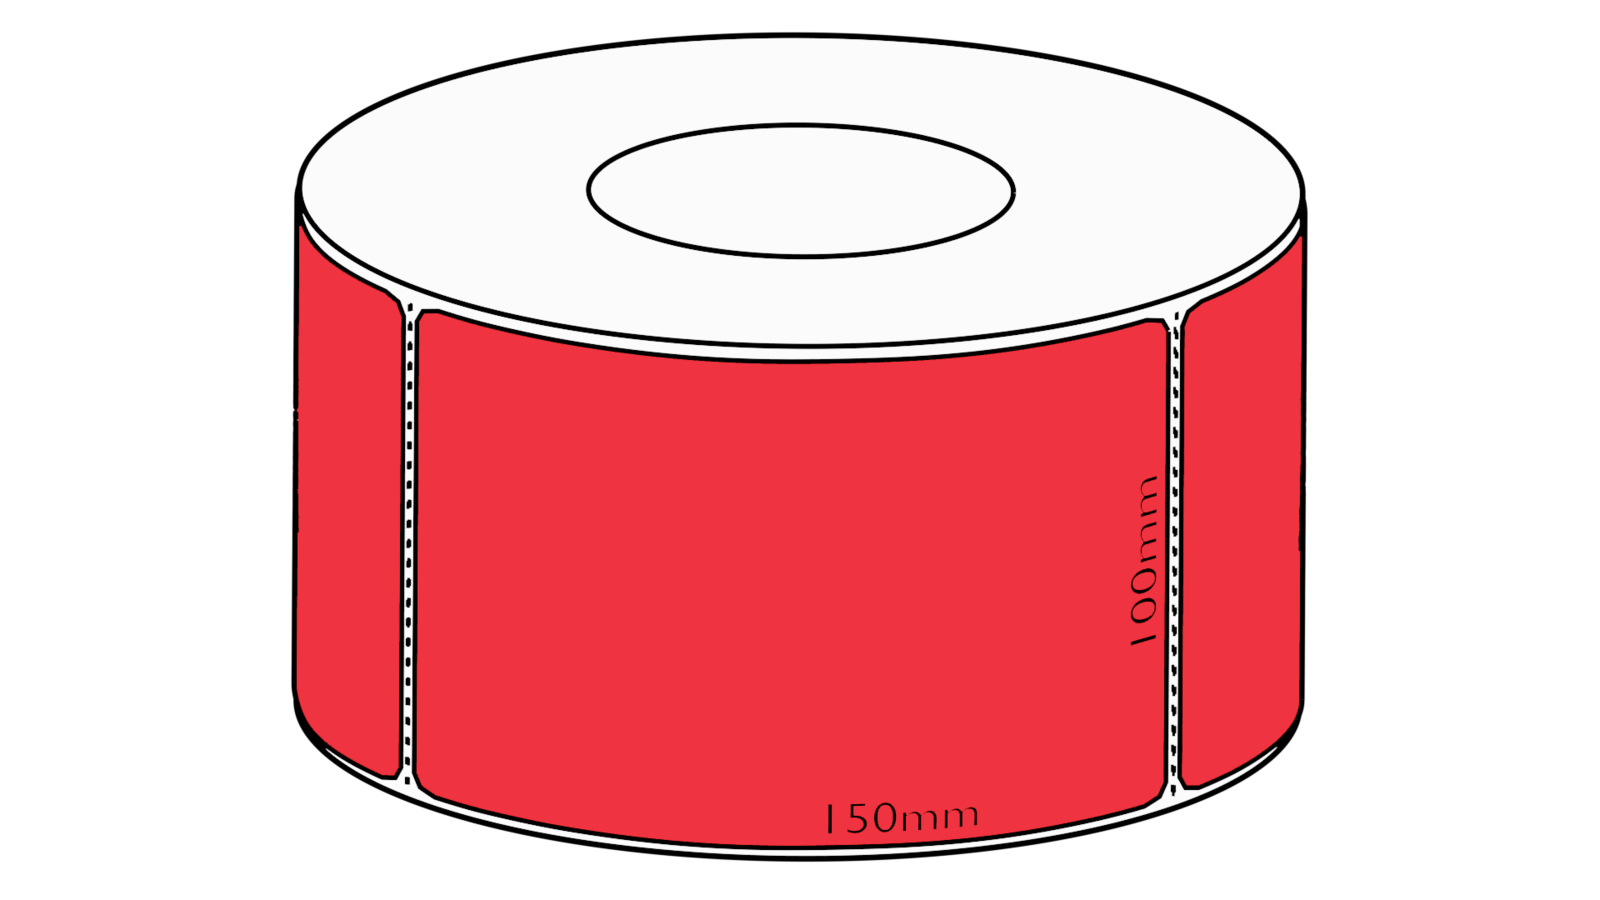 100x150mm Red Direct Thermal Permanent Label, 1000 per roll, 76mm core, Perforated